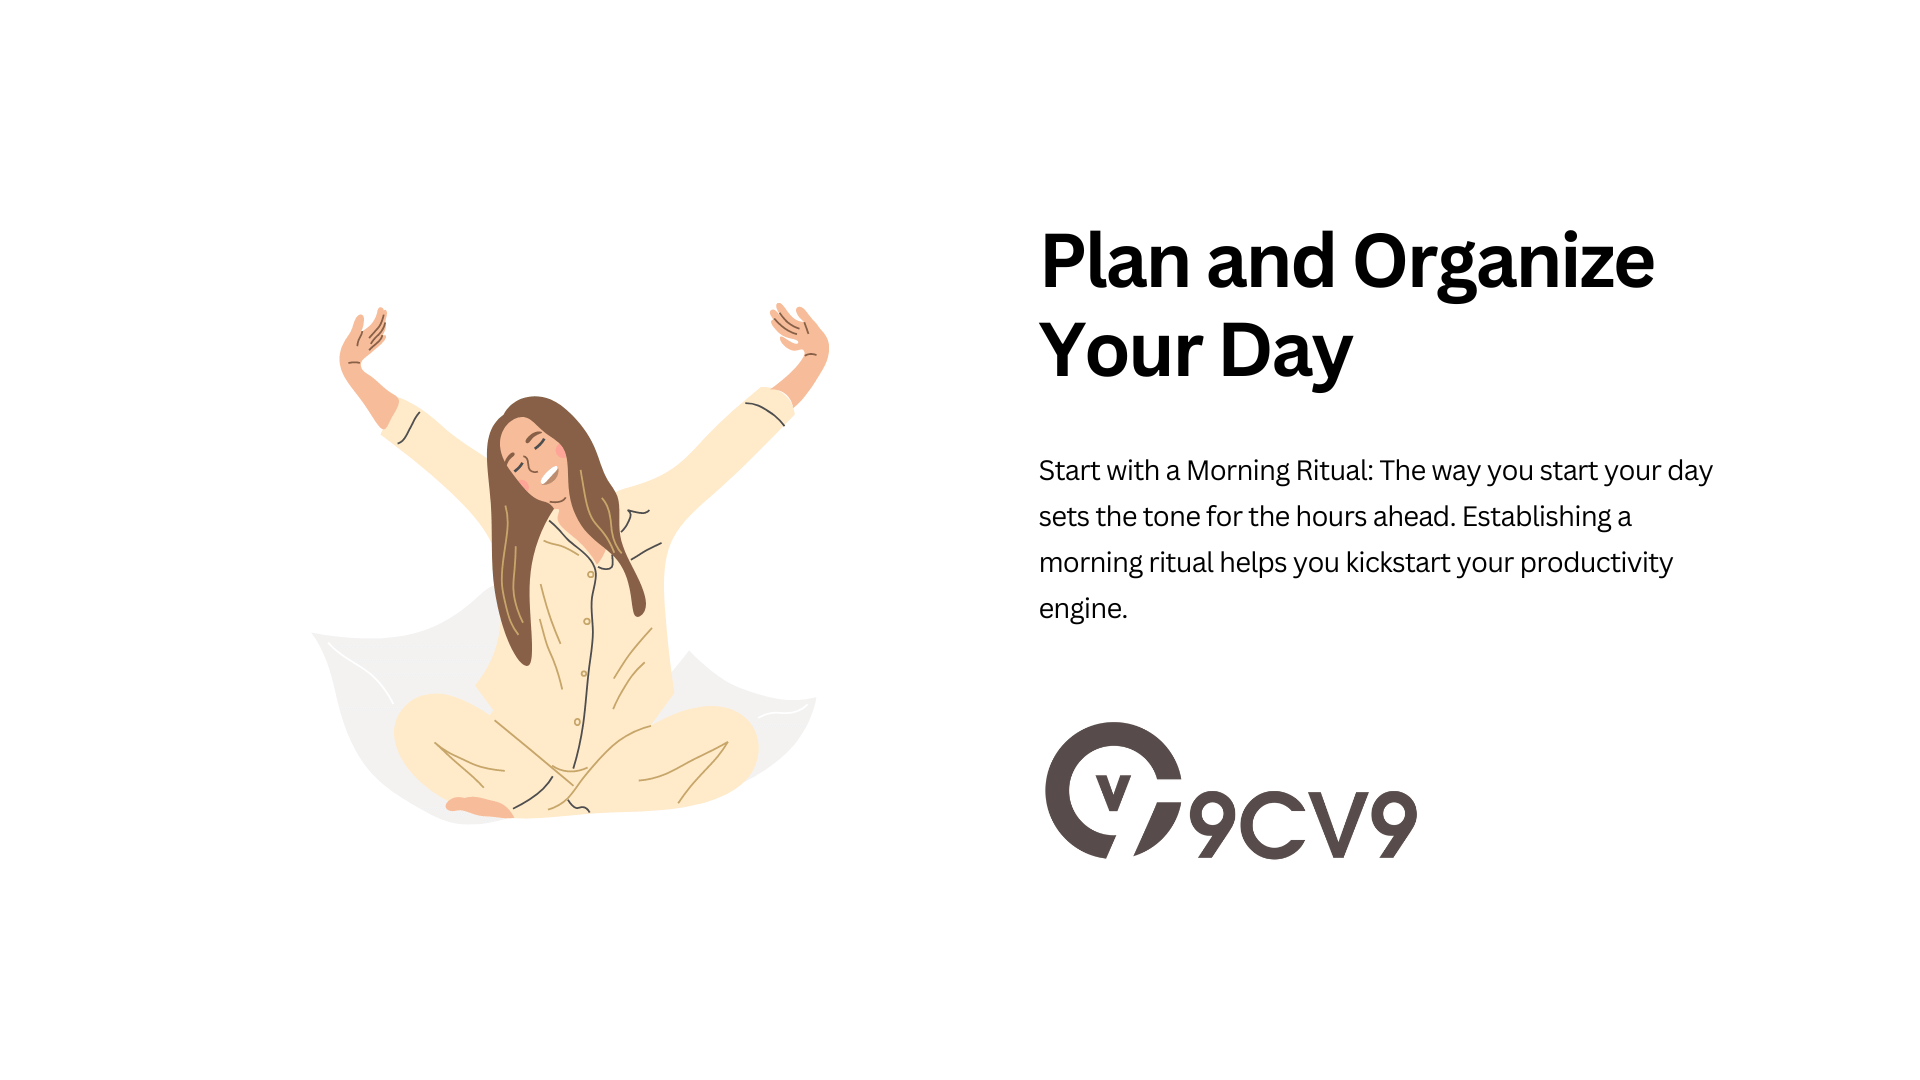 Plan and Organize Your Day